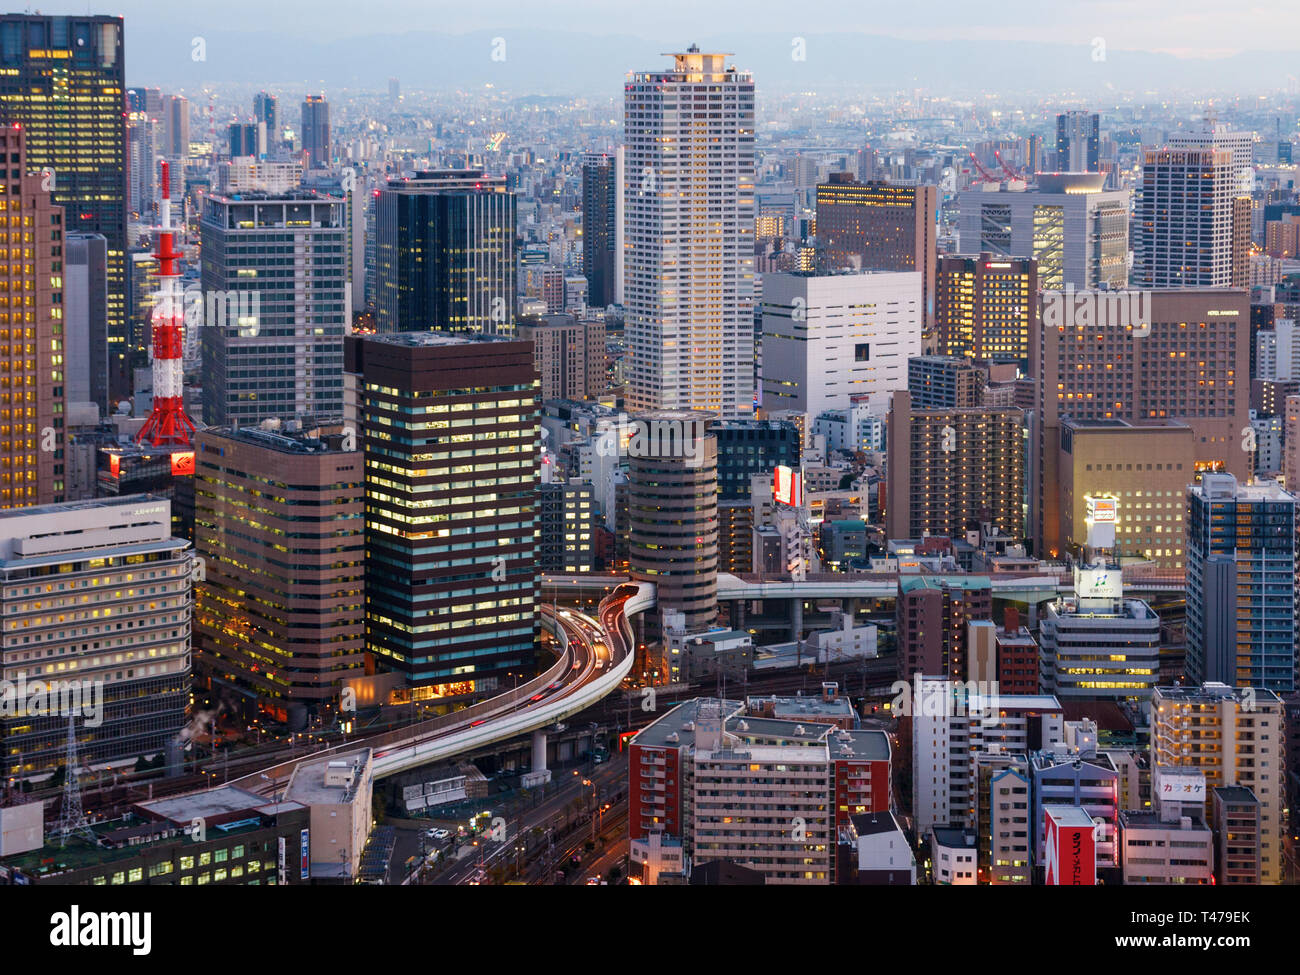 Aerial view of skyscrapers and office buildings of Umeda district. Osaka, Japan Stock Photo